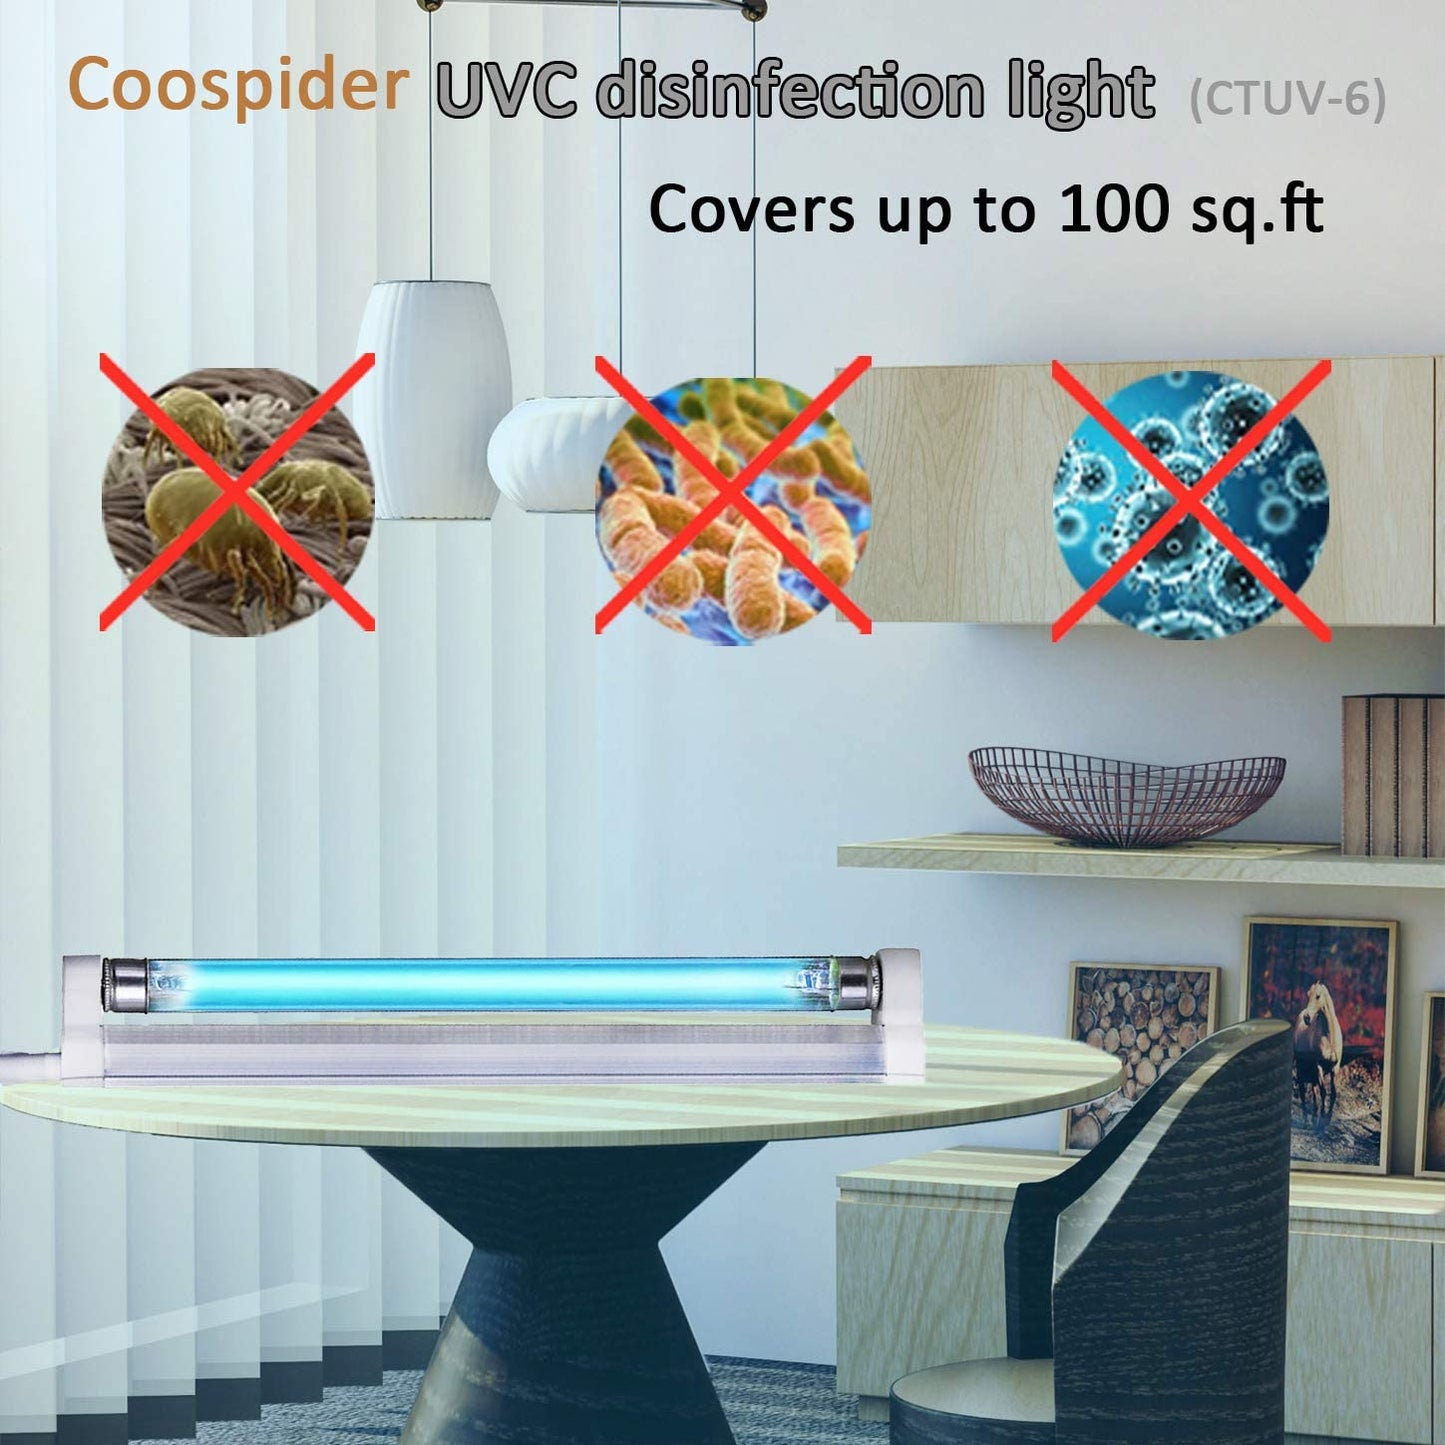 UVC with Ozone Light Lamp Bulb with 5ft Cord and Plug Cover up to 100 sq. ft. Room 110V 6W